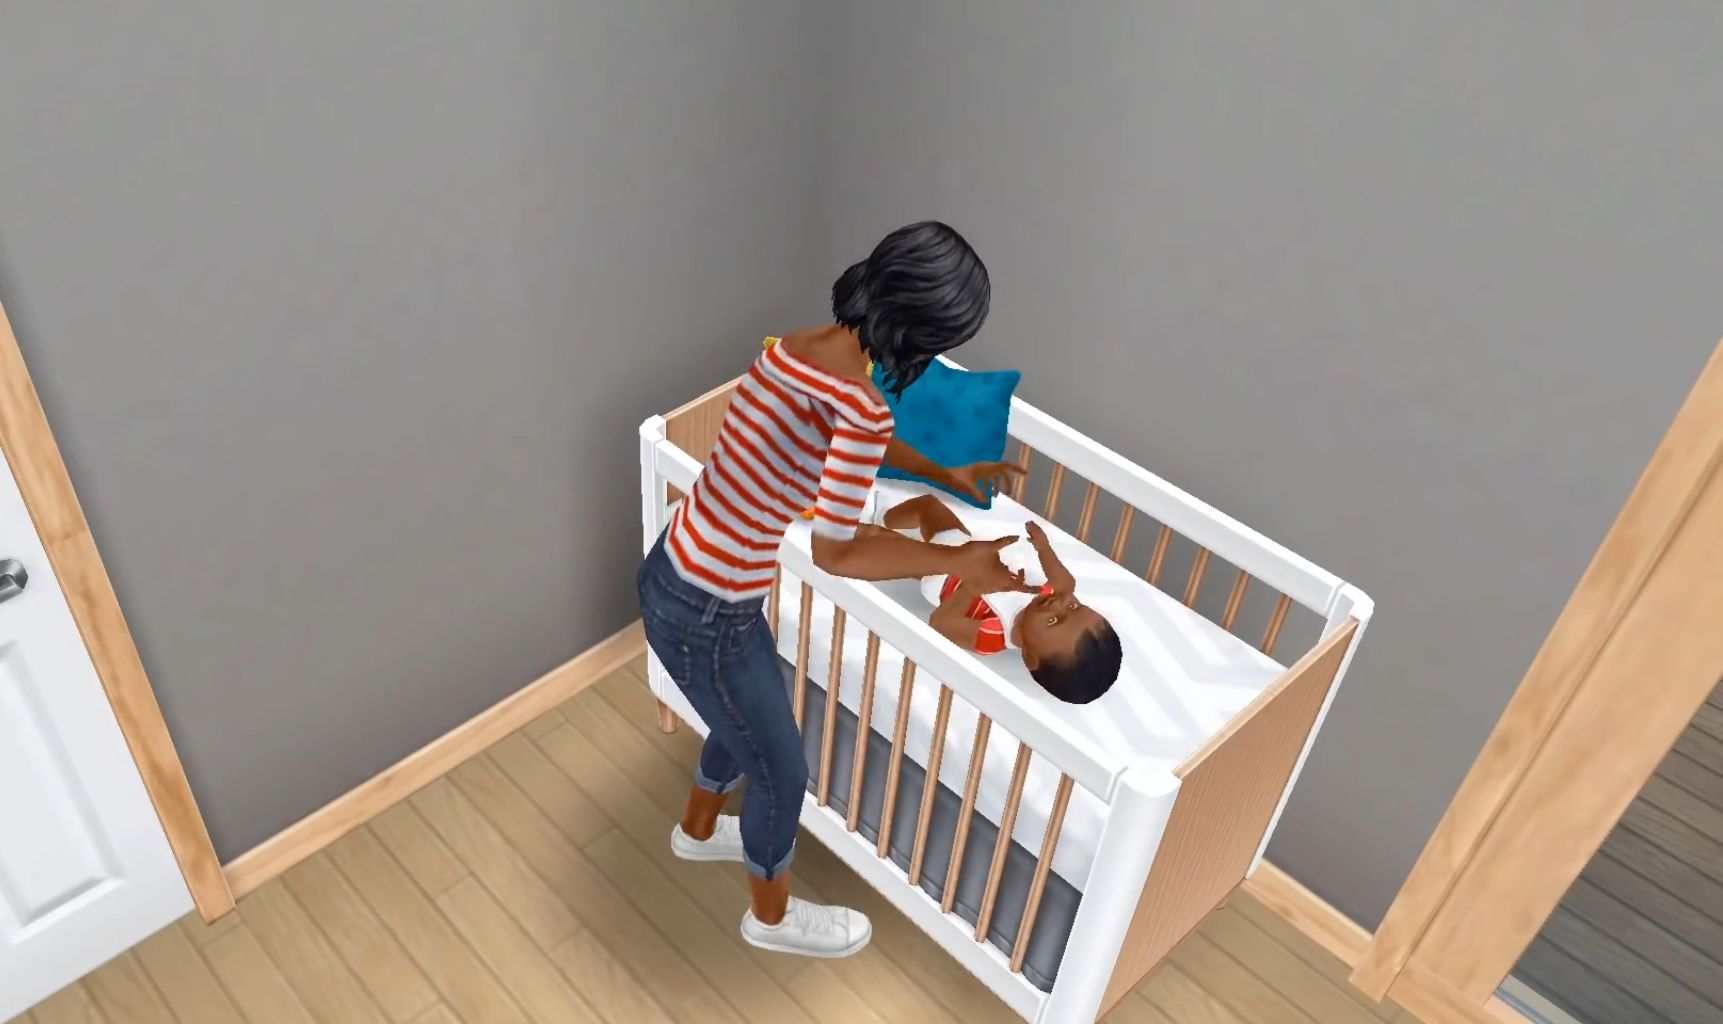 ‘The Sims Freeplay’ Adds Pregnancy Allowing You to Plan a Baby Shower